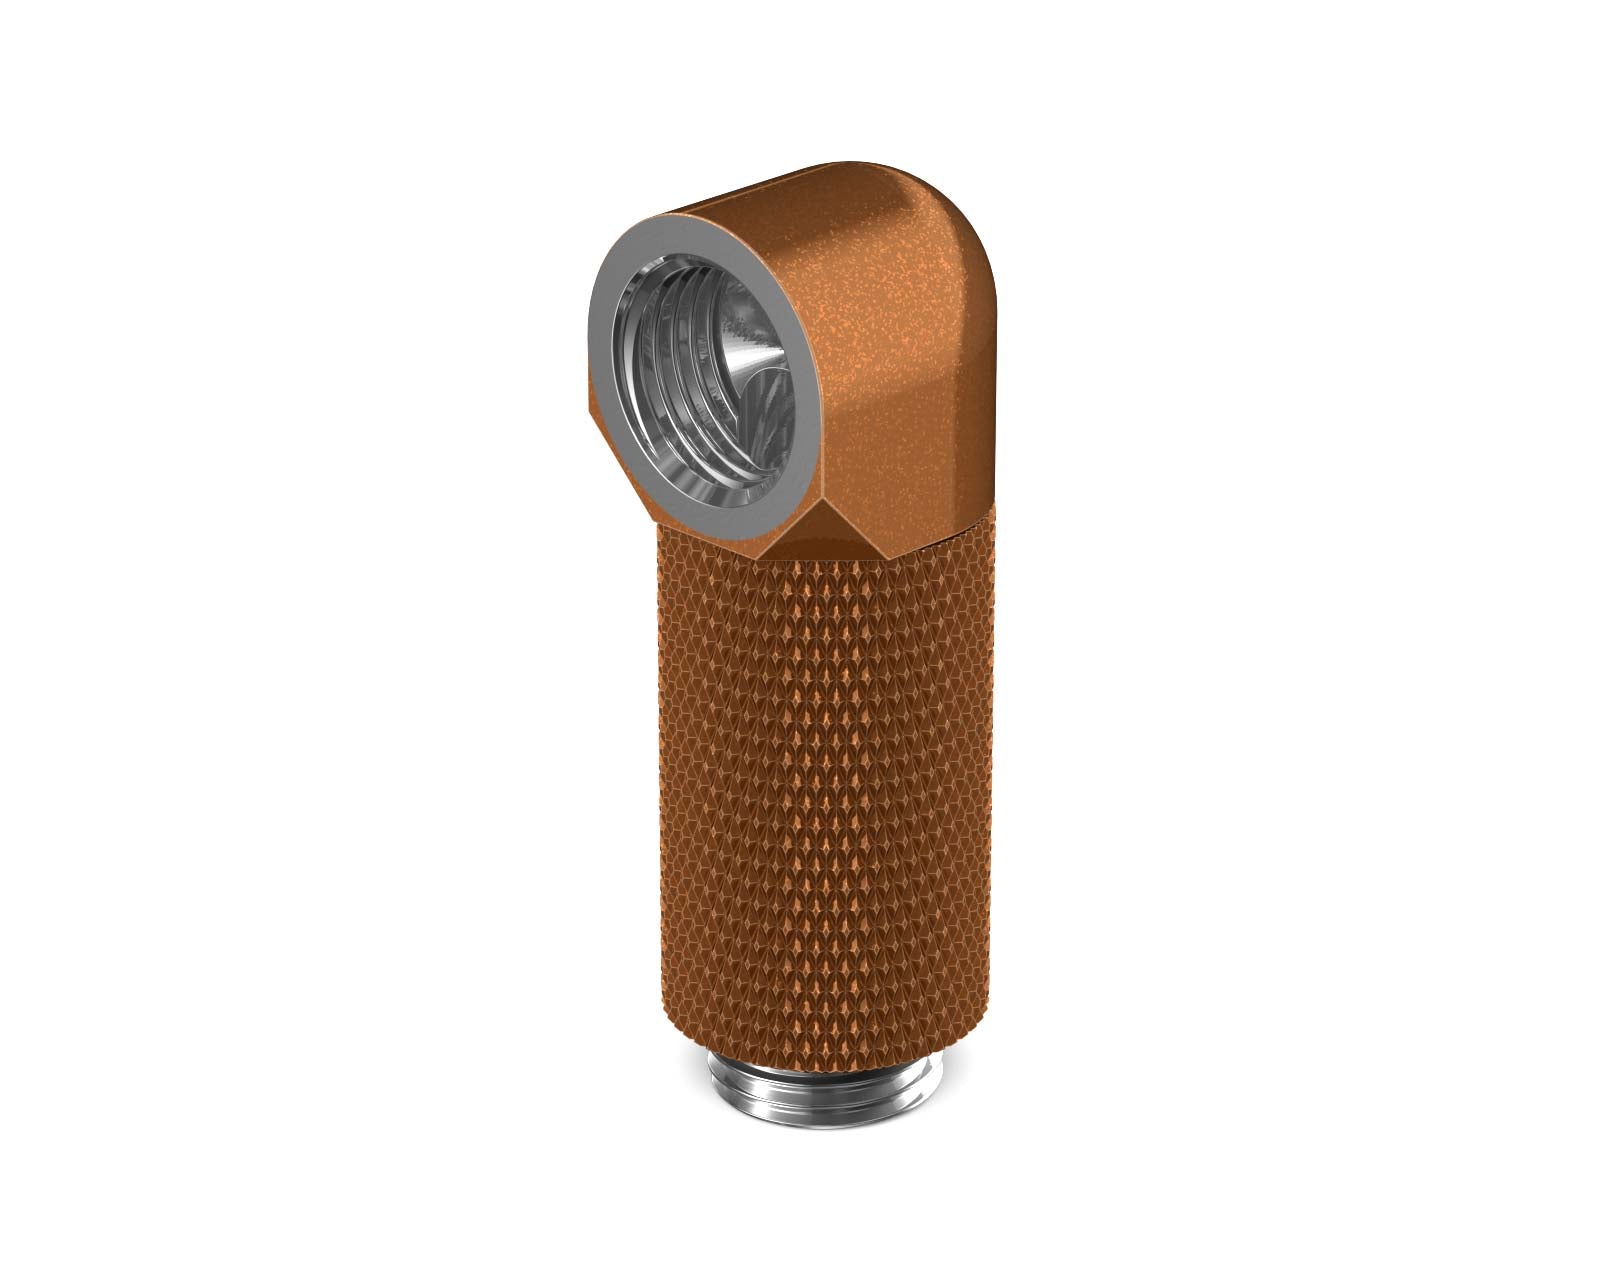 PrimoChill Male to Female G 1/4in. 90 Degree SX Rotary 30mm Extension Elbow Fitting - PrimoChill - KEEPING IT COOL Copper